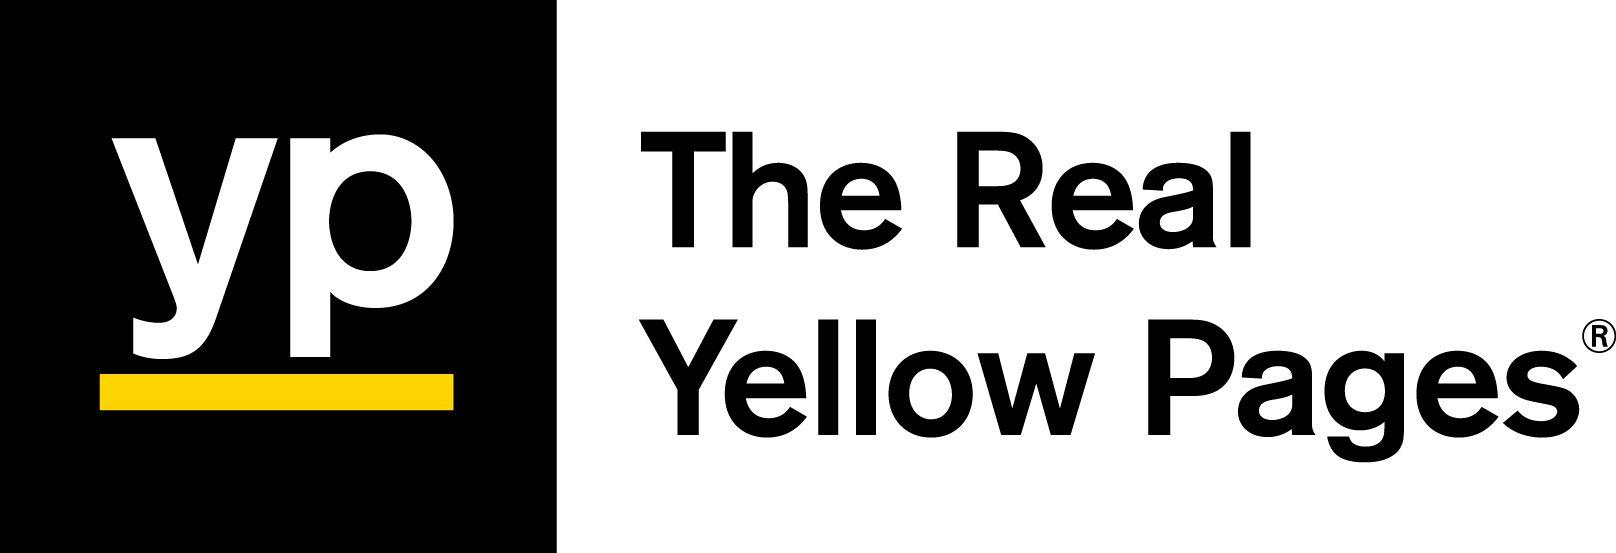 YP Yellow Pages New Logo - YP Research Offers Insights on Consumers' Local Search and Spending ...